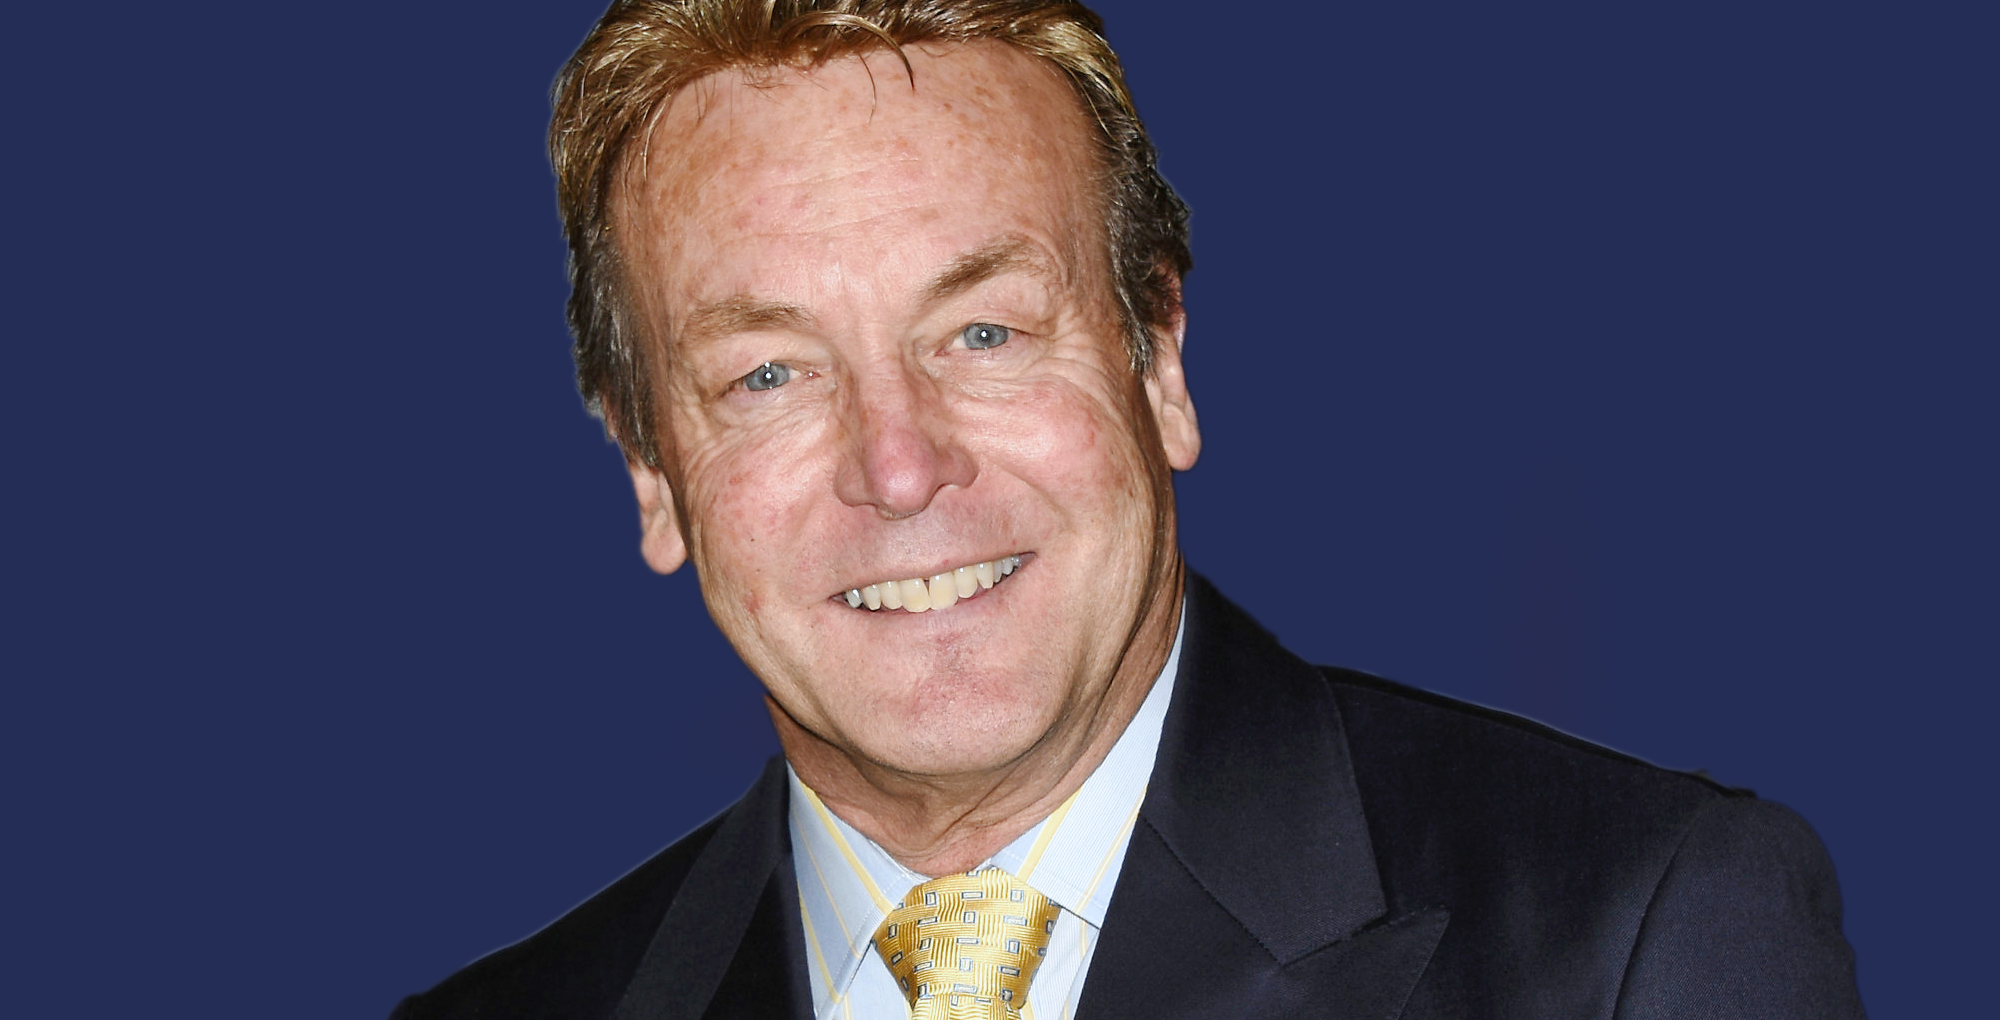 doug davidson played paul williams on the young and the restless.